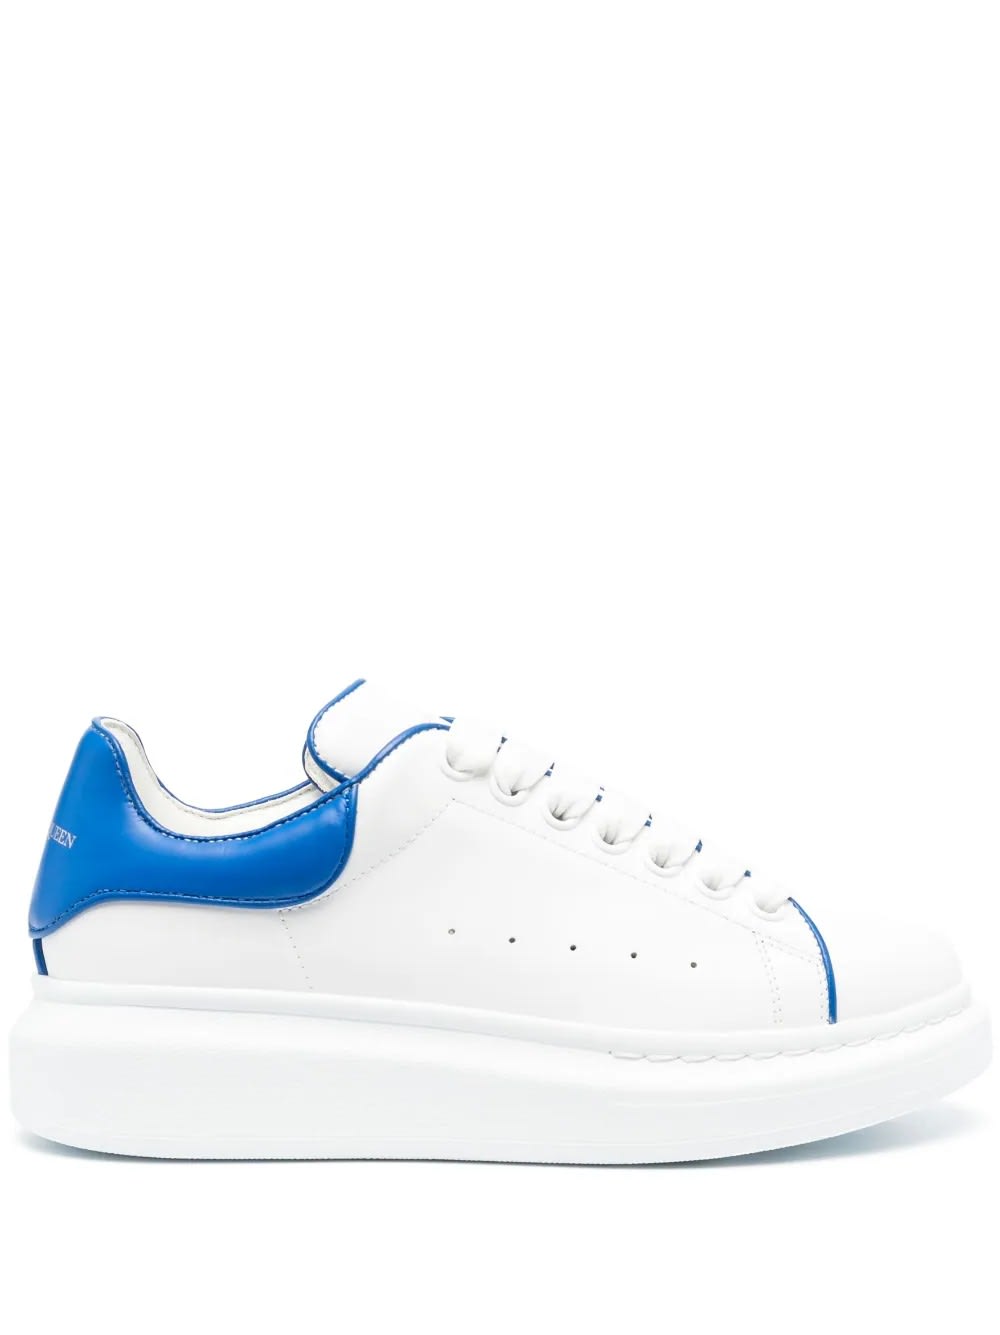 White Oversize Sneakers With Blue Stitching